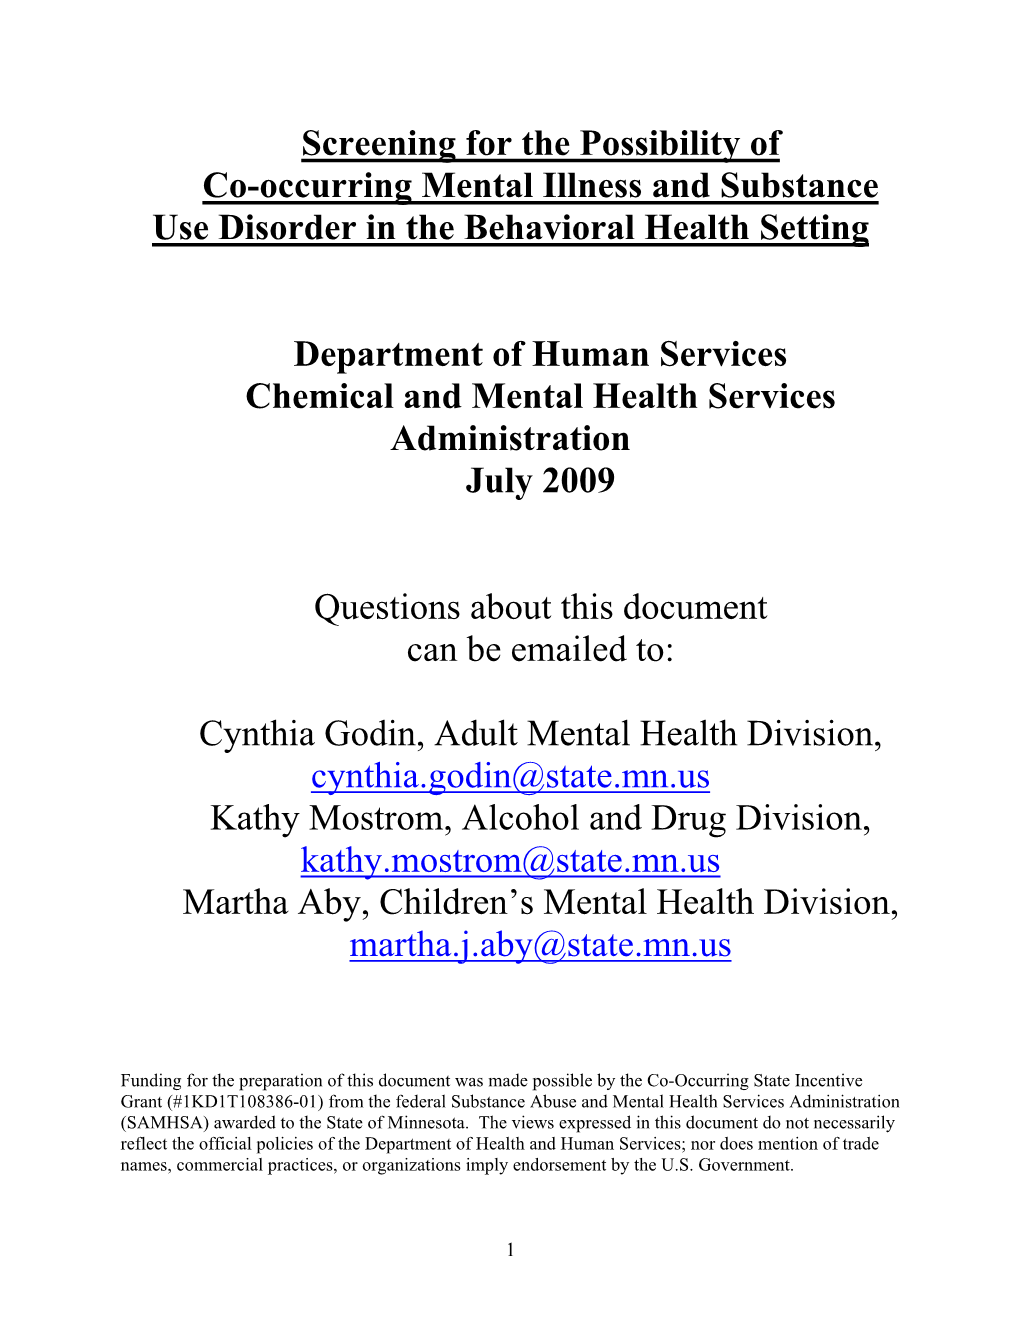 Screening for the Possibility of Co-Occurring Mental Illness and Substance Use Disorder in the Behavioral Health Setting